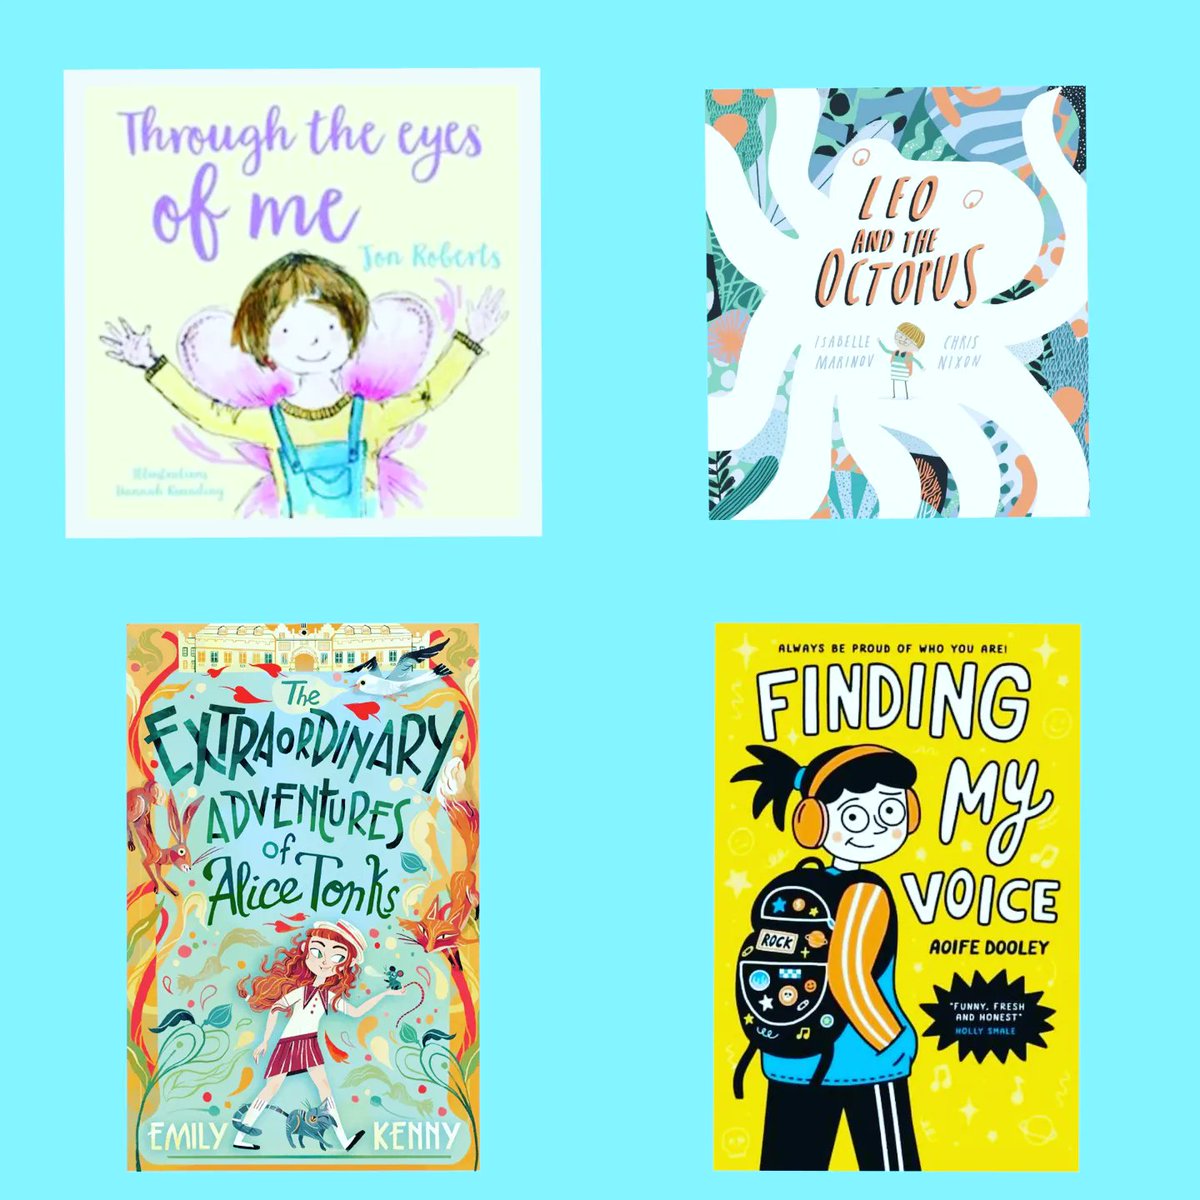 Today is the final day of #AutismAcceptanceWeek. 
Check out these brilliant books to support knowledge, understanding and empathy. @NewHallPrep #readingforpleasure #readingforempathy #BSiL